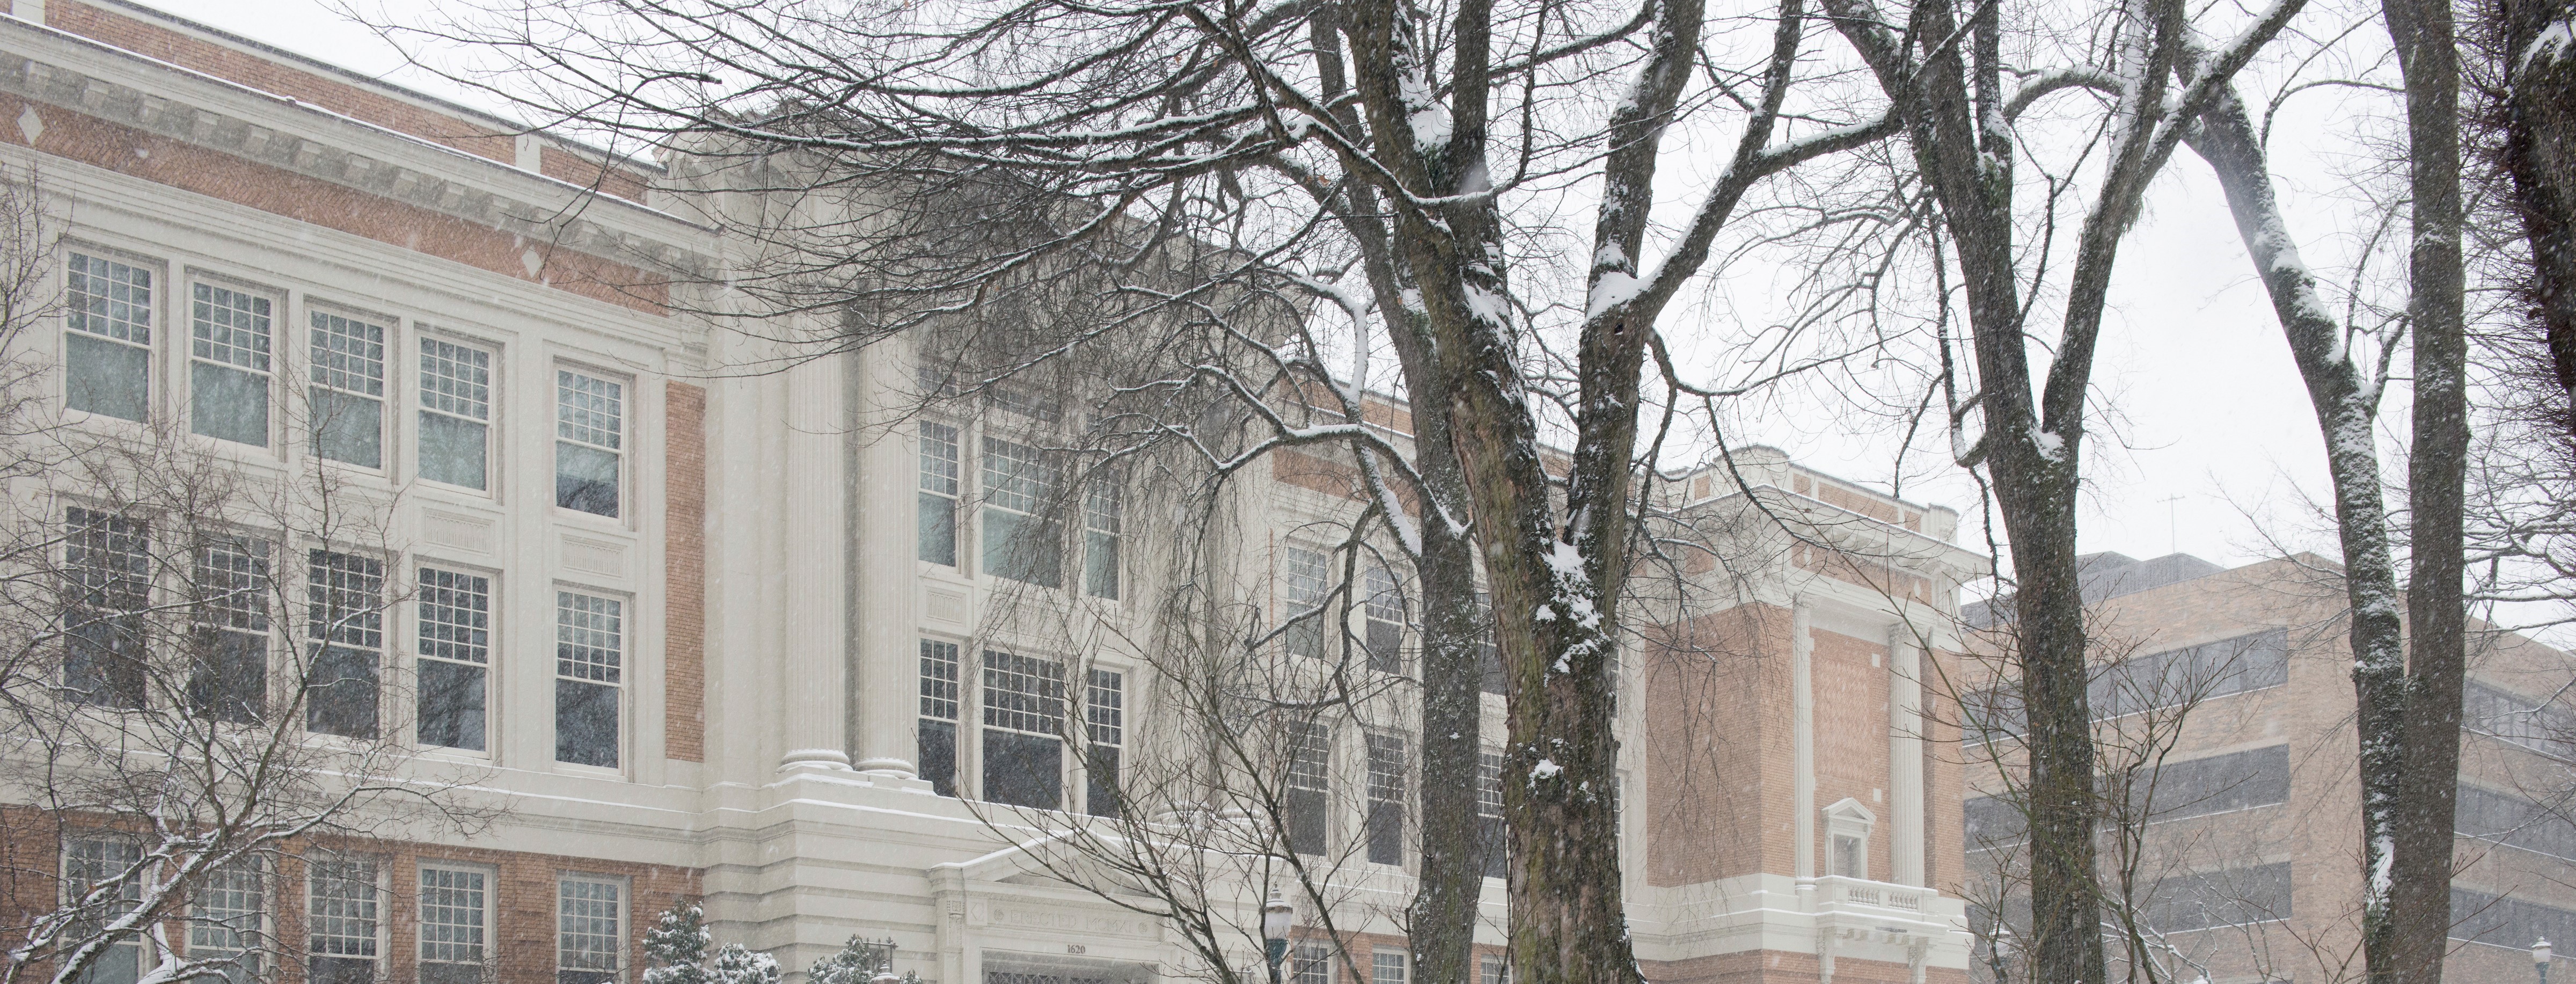 Lincoln Hall on a snowy winter day - horizontal banner